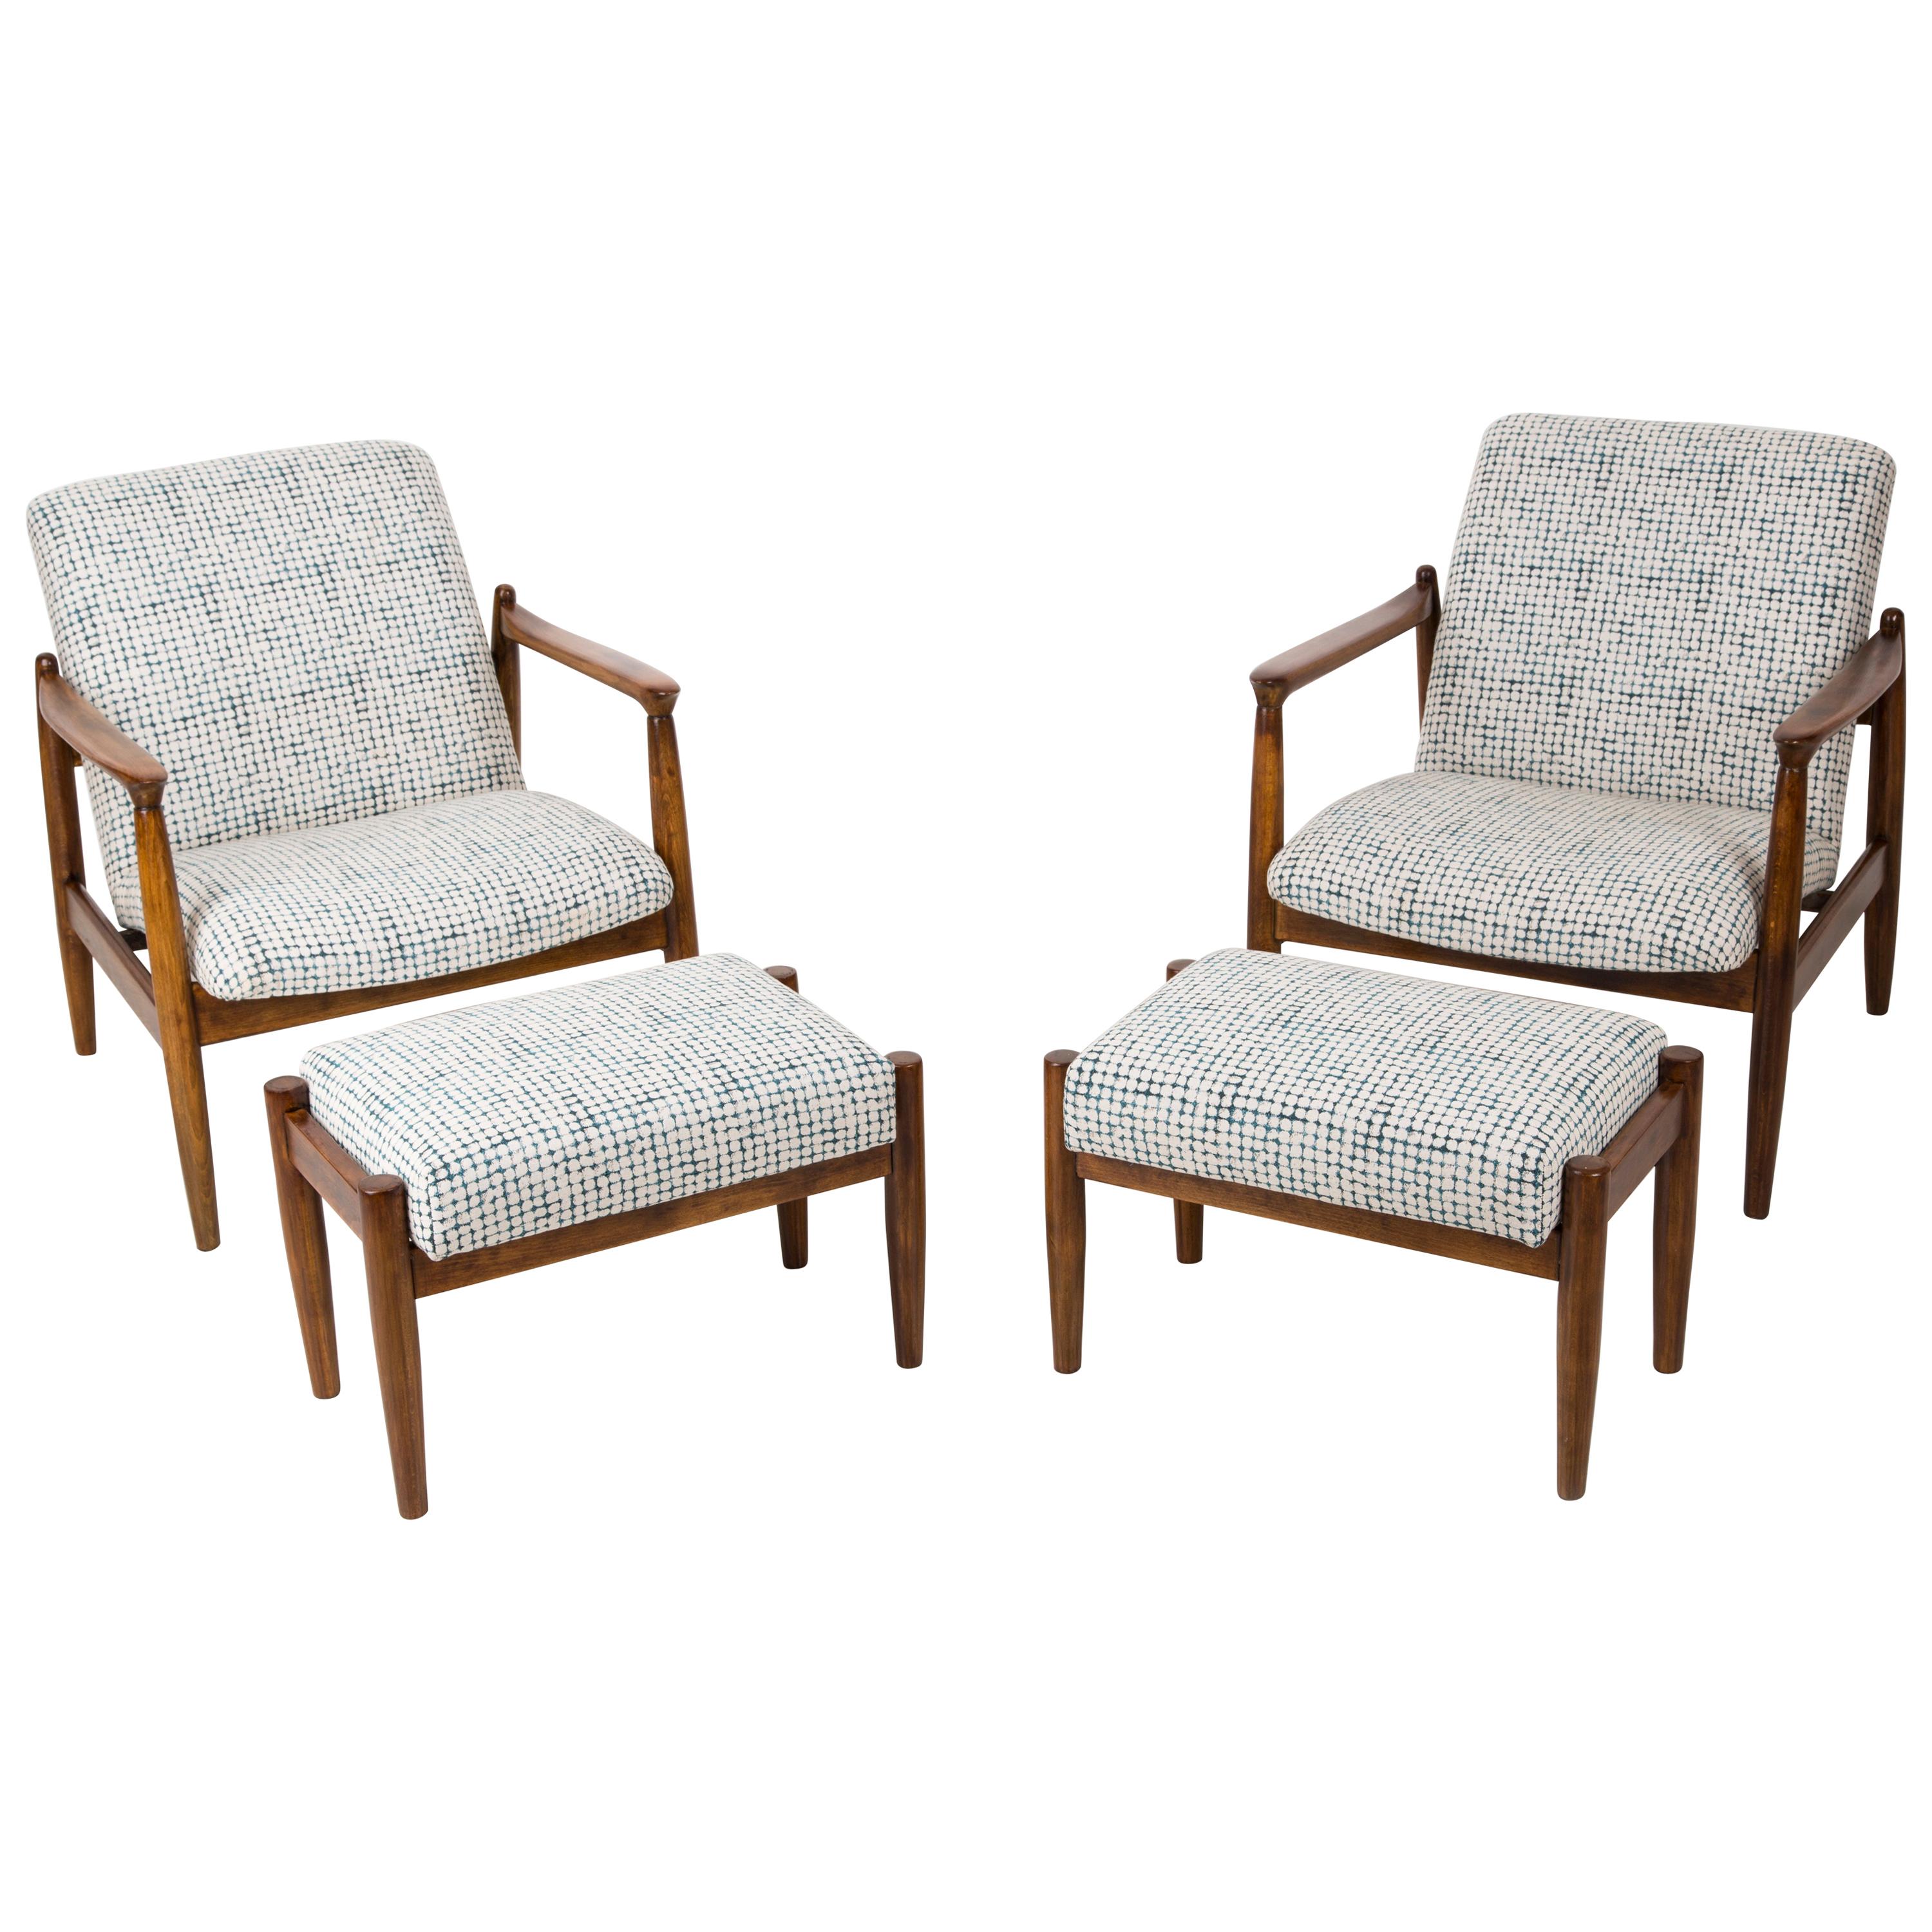 Set of White and Aqua Vintage Armchairs and Stools, Edmund Homa, 1960s